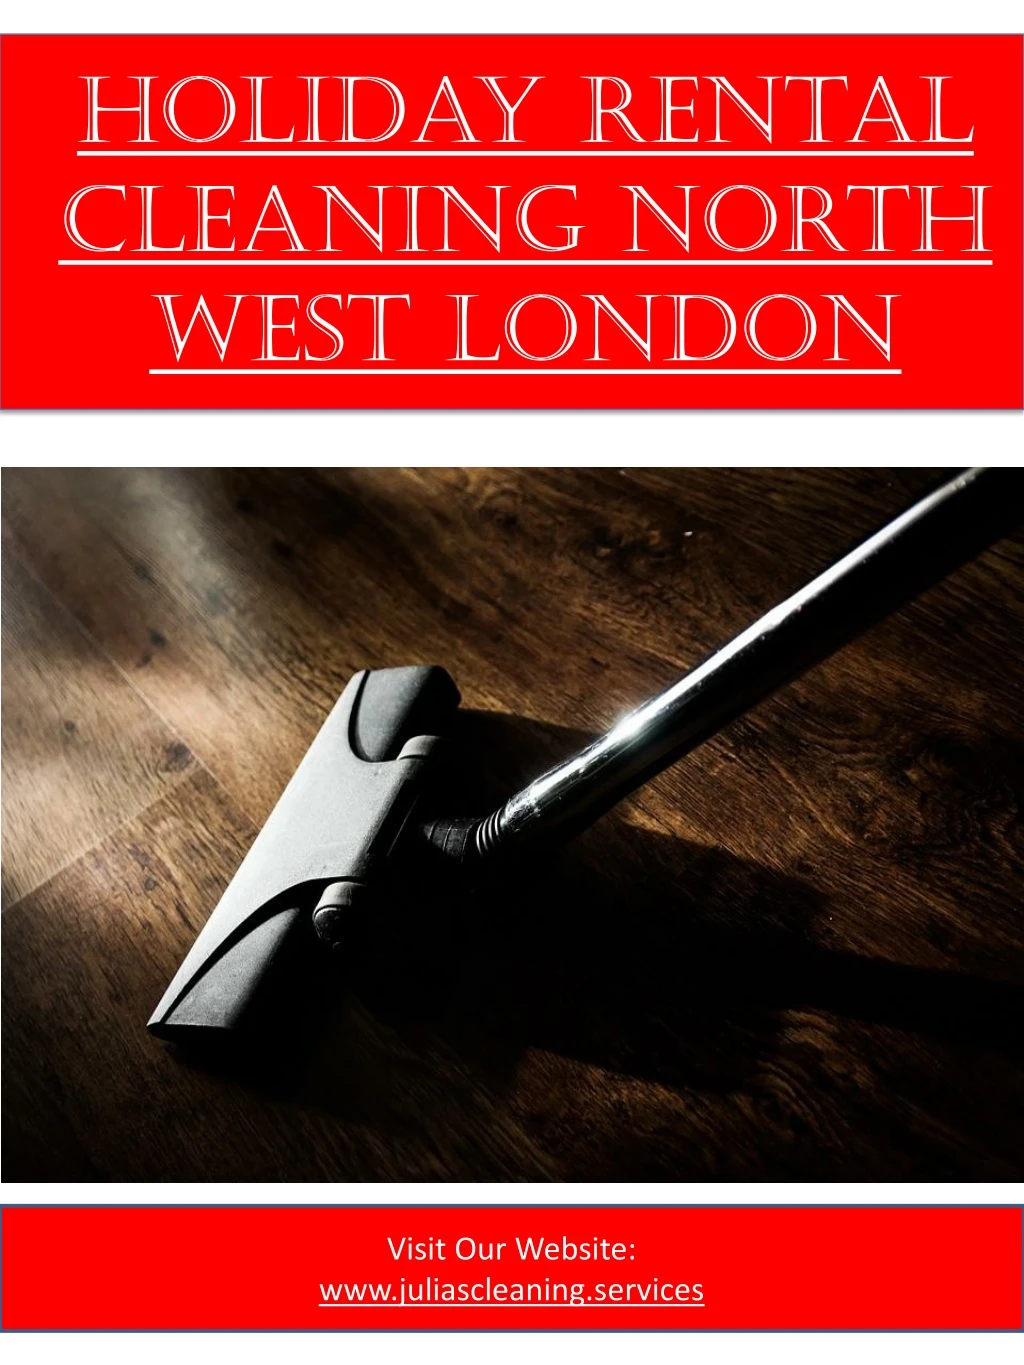 holiday rental cleaning north west london